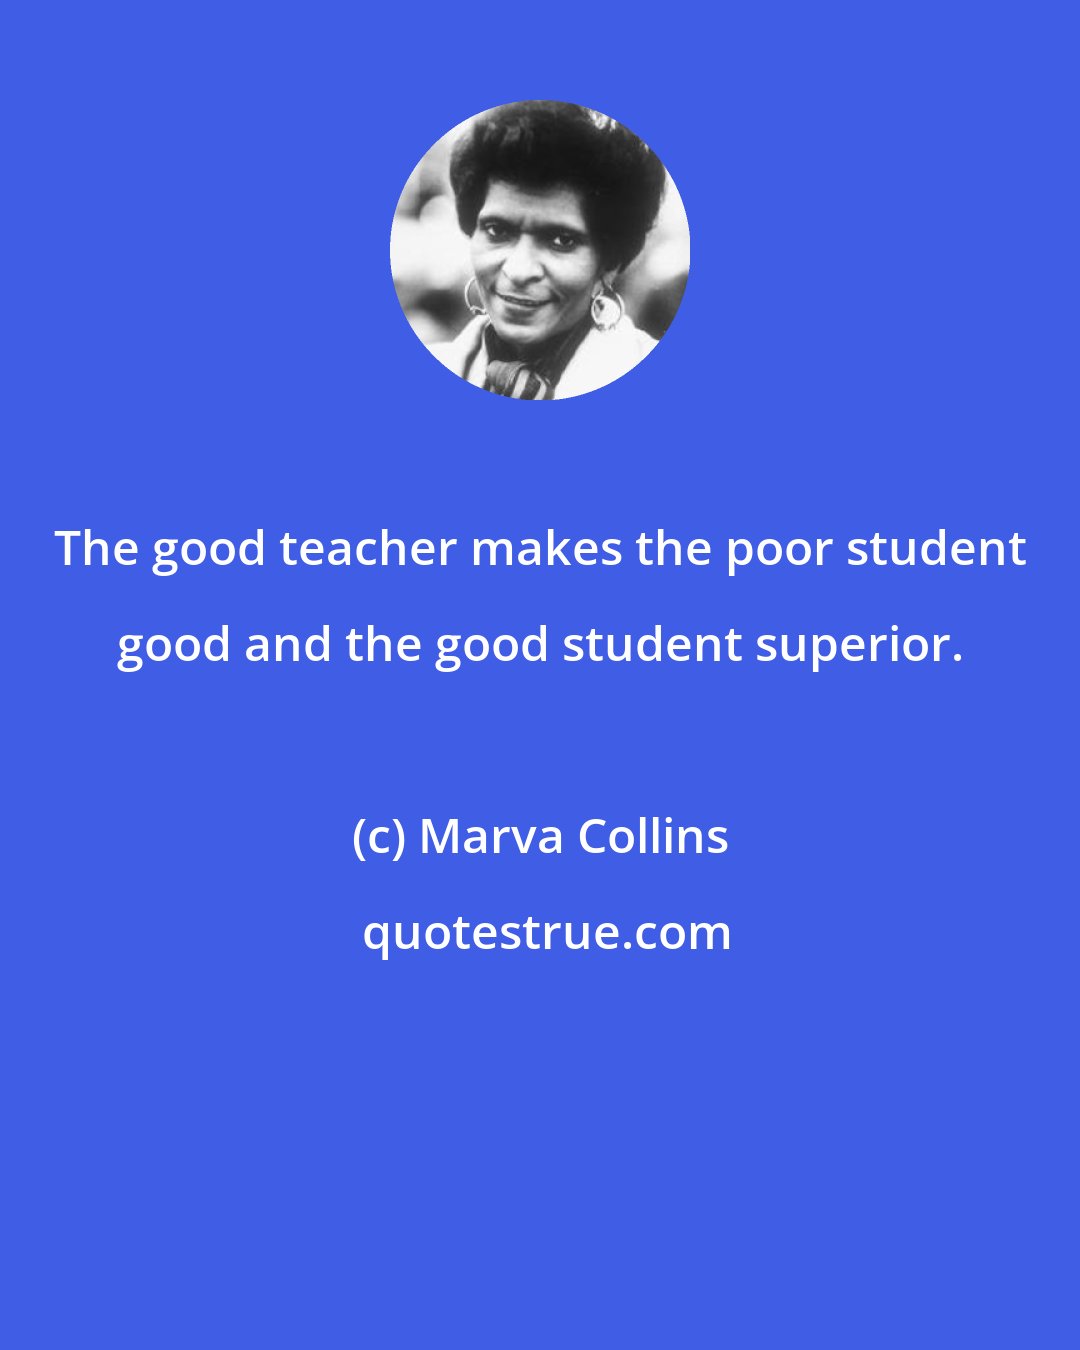 Marva Collins: The good teacher makes the poor student good and the good student superior.